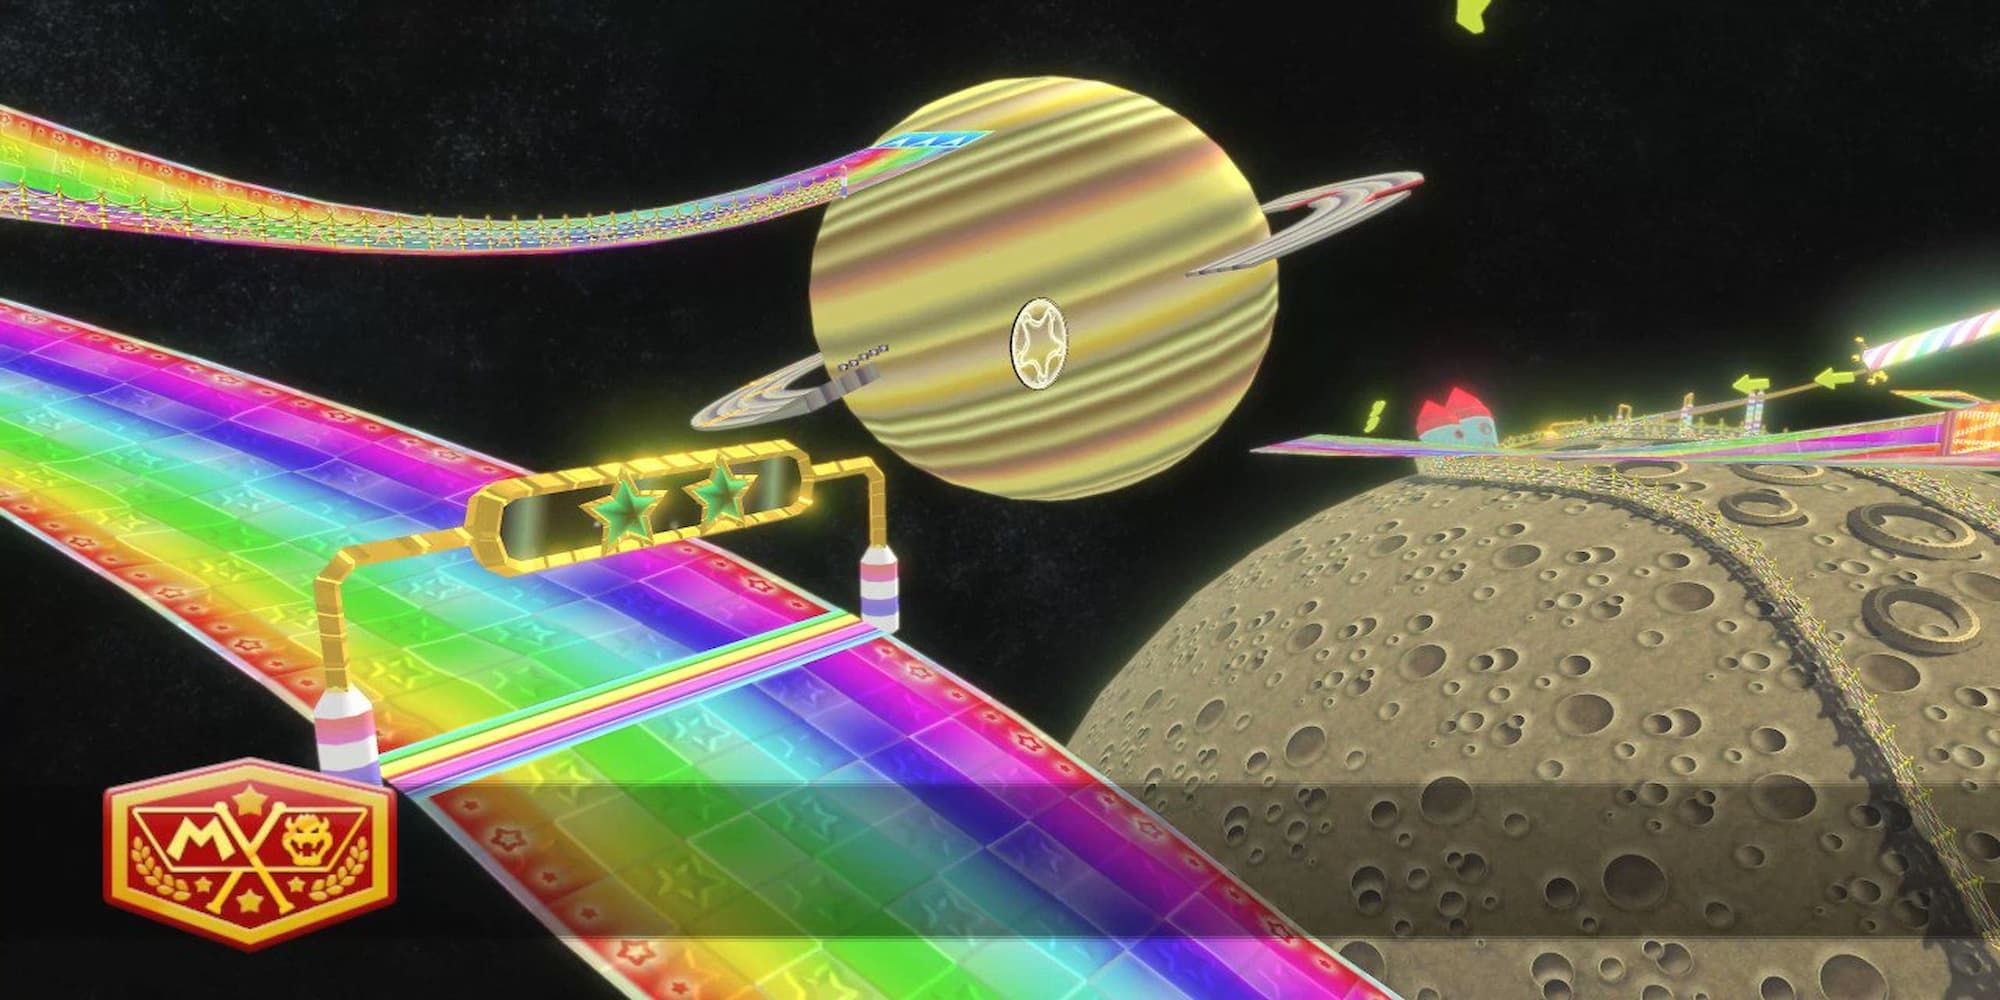 The 3DS version of Rainbow Road recreated in Mario Kart 8 showcased the rainbow colored track with parts going over the moon and wrapping around a planet as if it were the rings of Saturn.